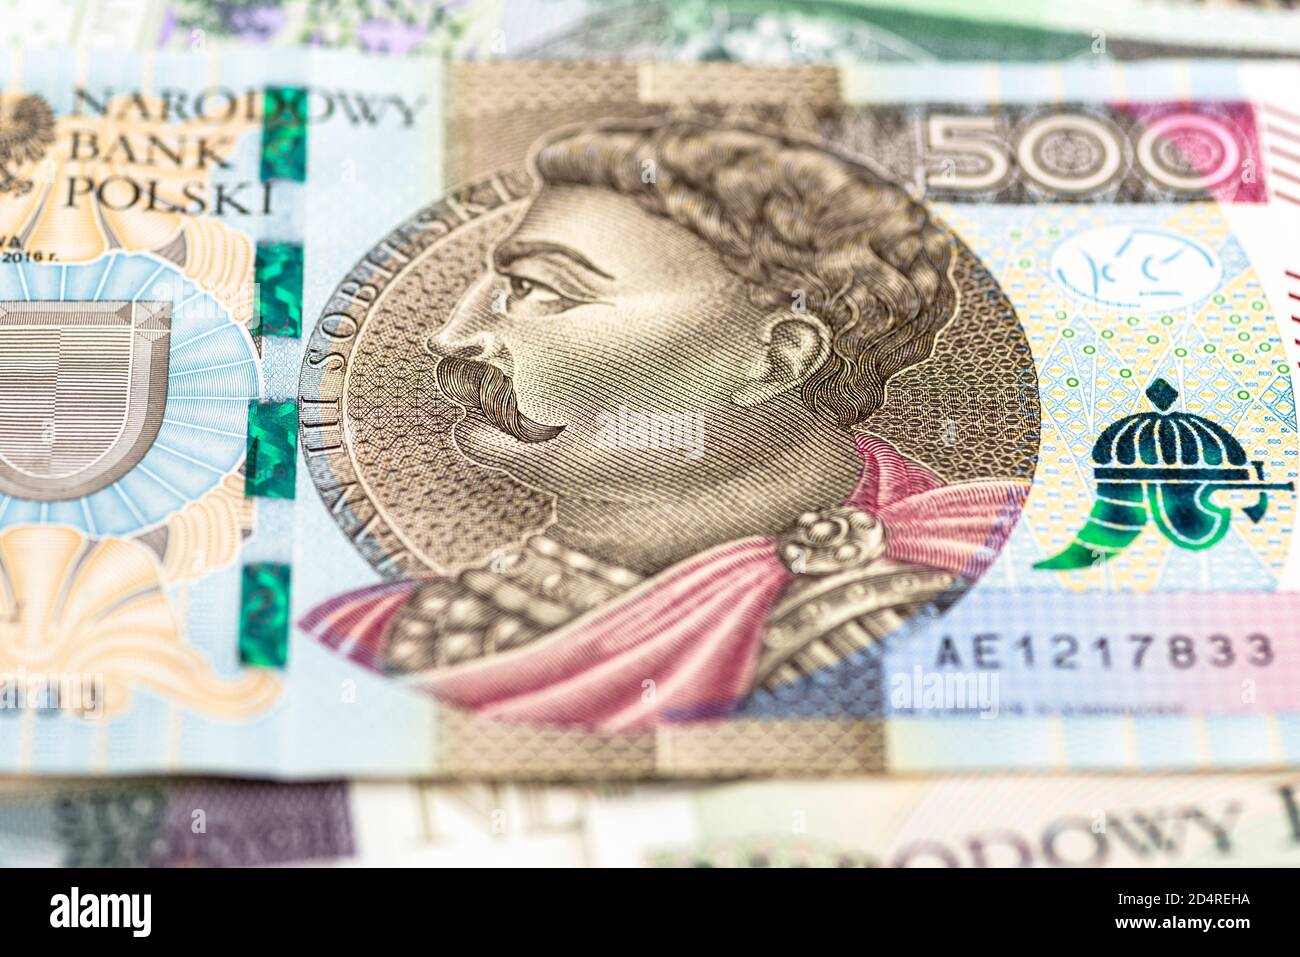 Macro photo of the front side of a rare Polish 500 zloty banknote, close-up  on the portrait of Jan III Sobieski Stock Photo - Alamy